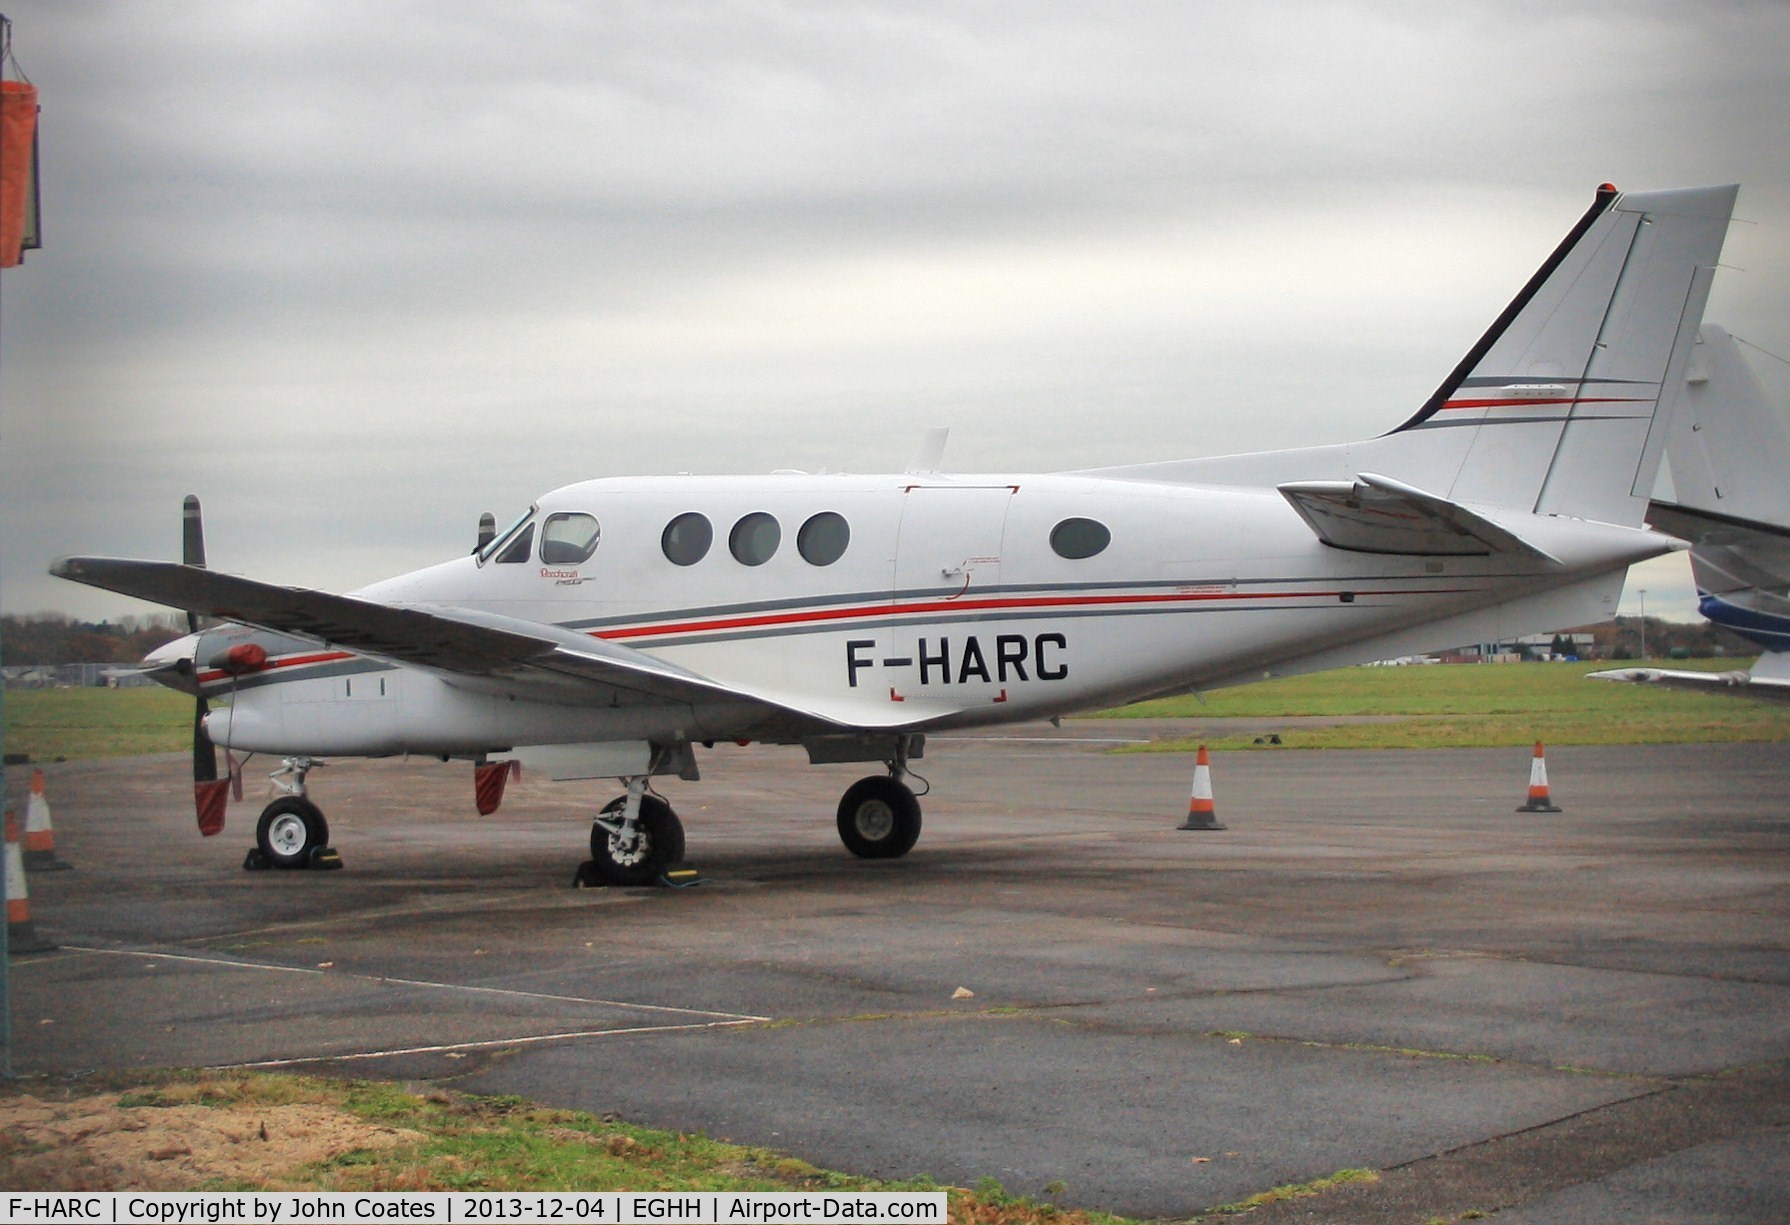 F-HARC, 2008 Hawker Beechcraft C90GTi King Air King Air C/N LJ-1900, Visitor to Signatures